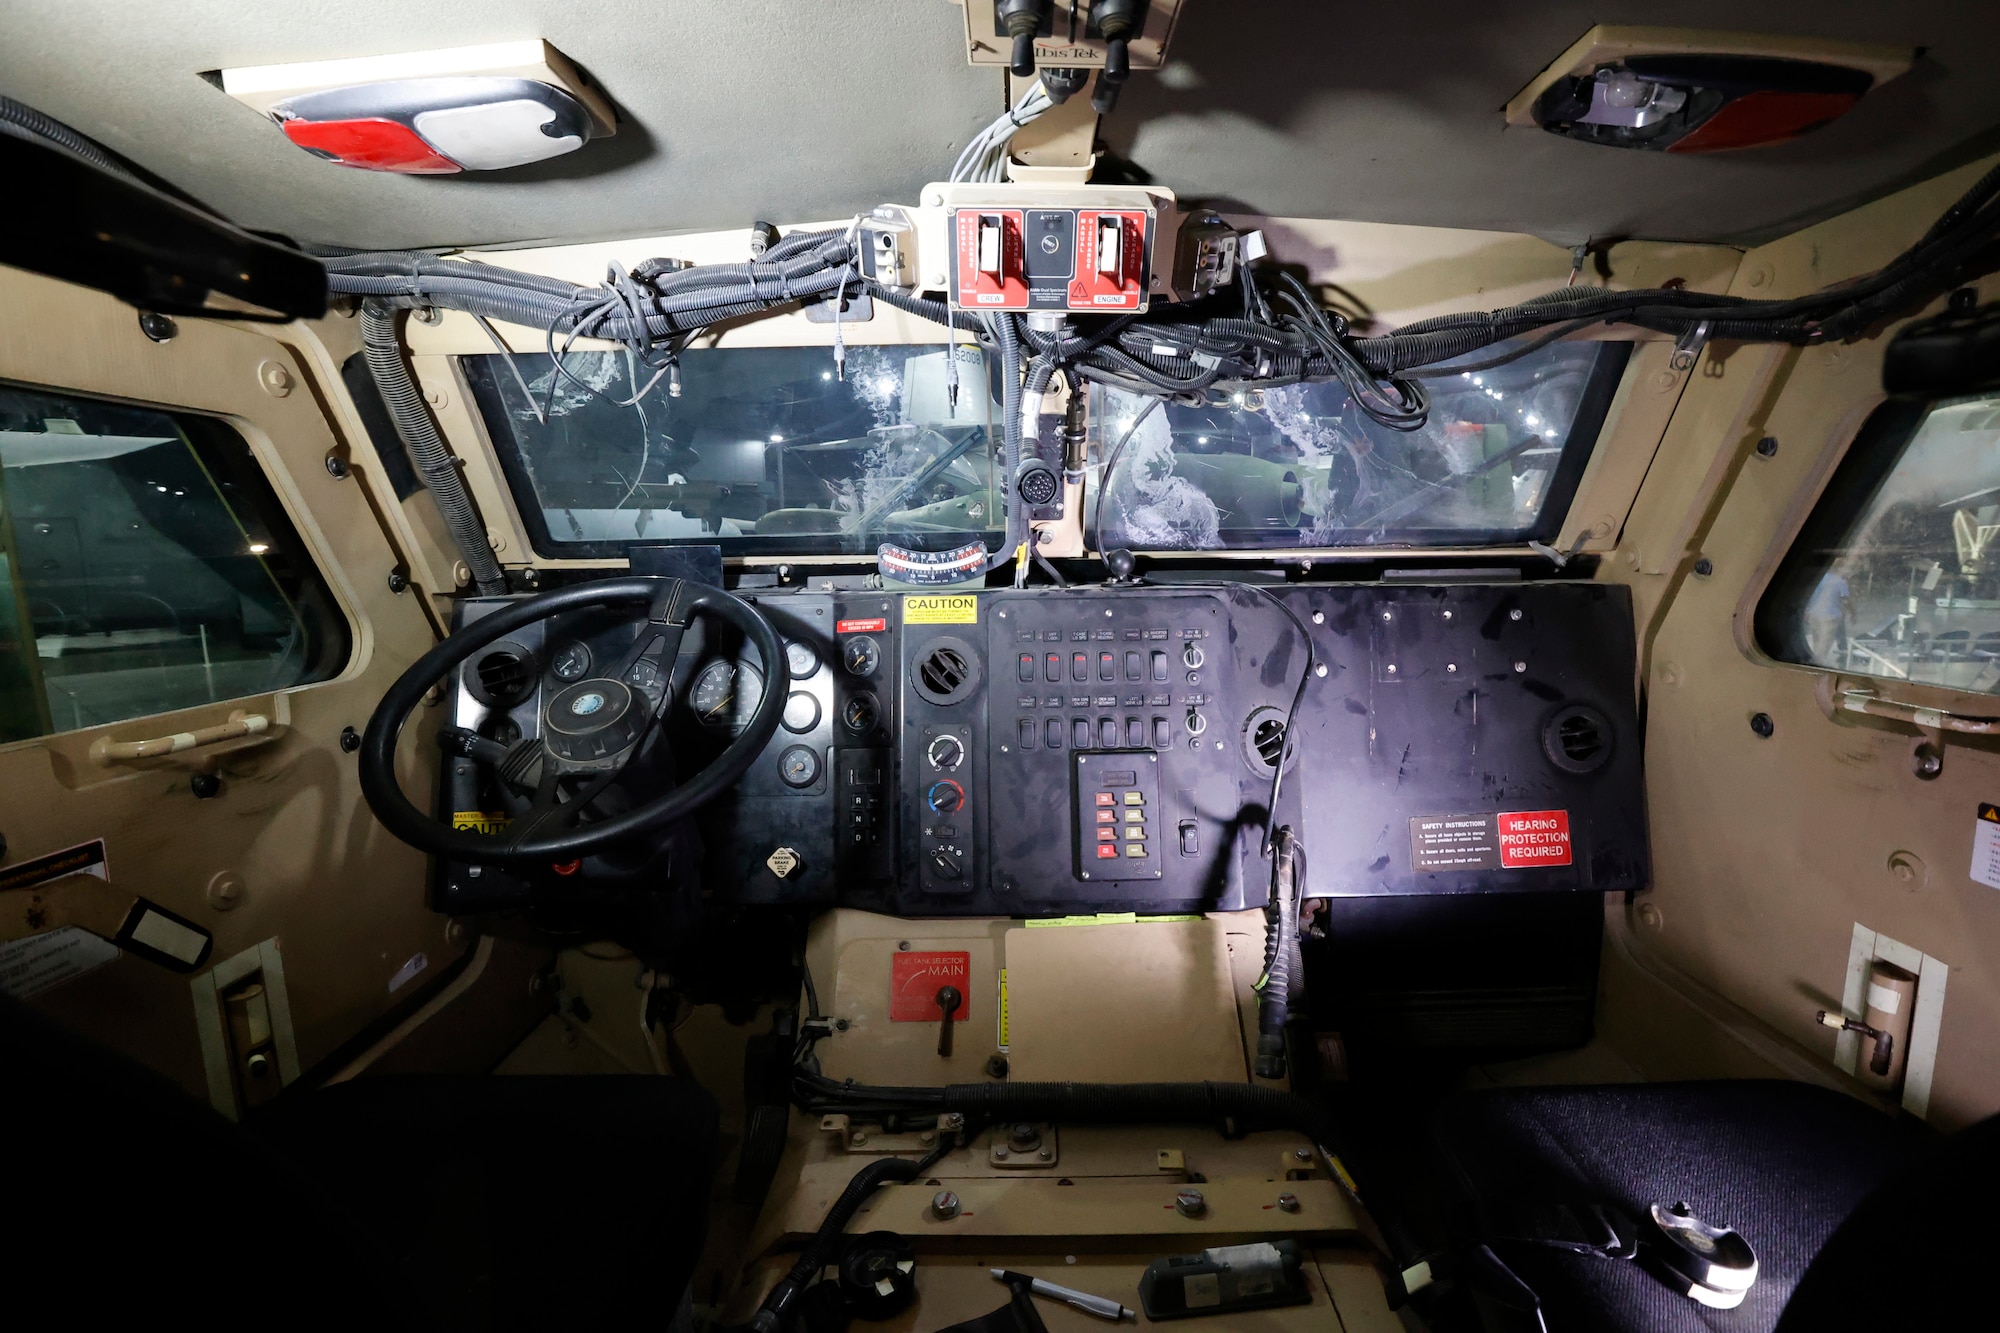 Interior views of the Cougar CAT II A1 MRAP on display in the Cold War Gallery of the National Museum of the U.S. Air Force.